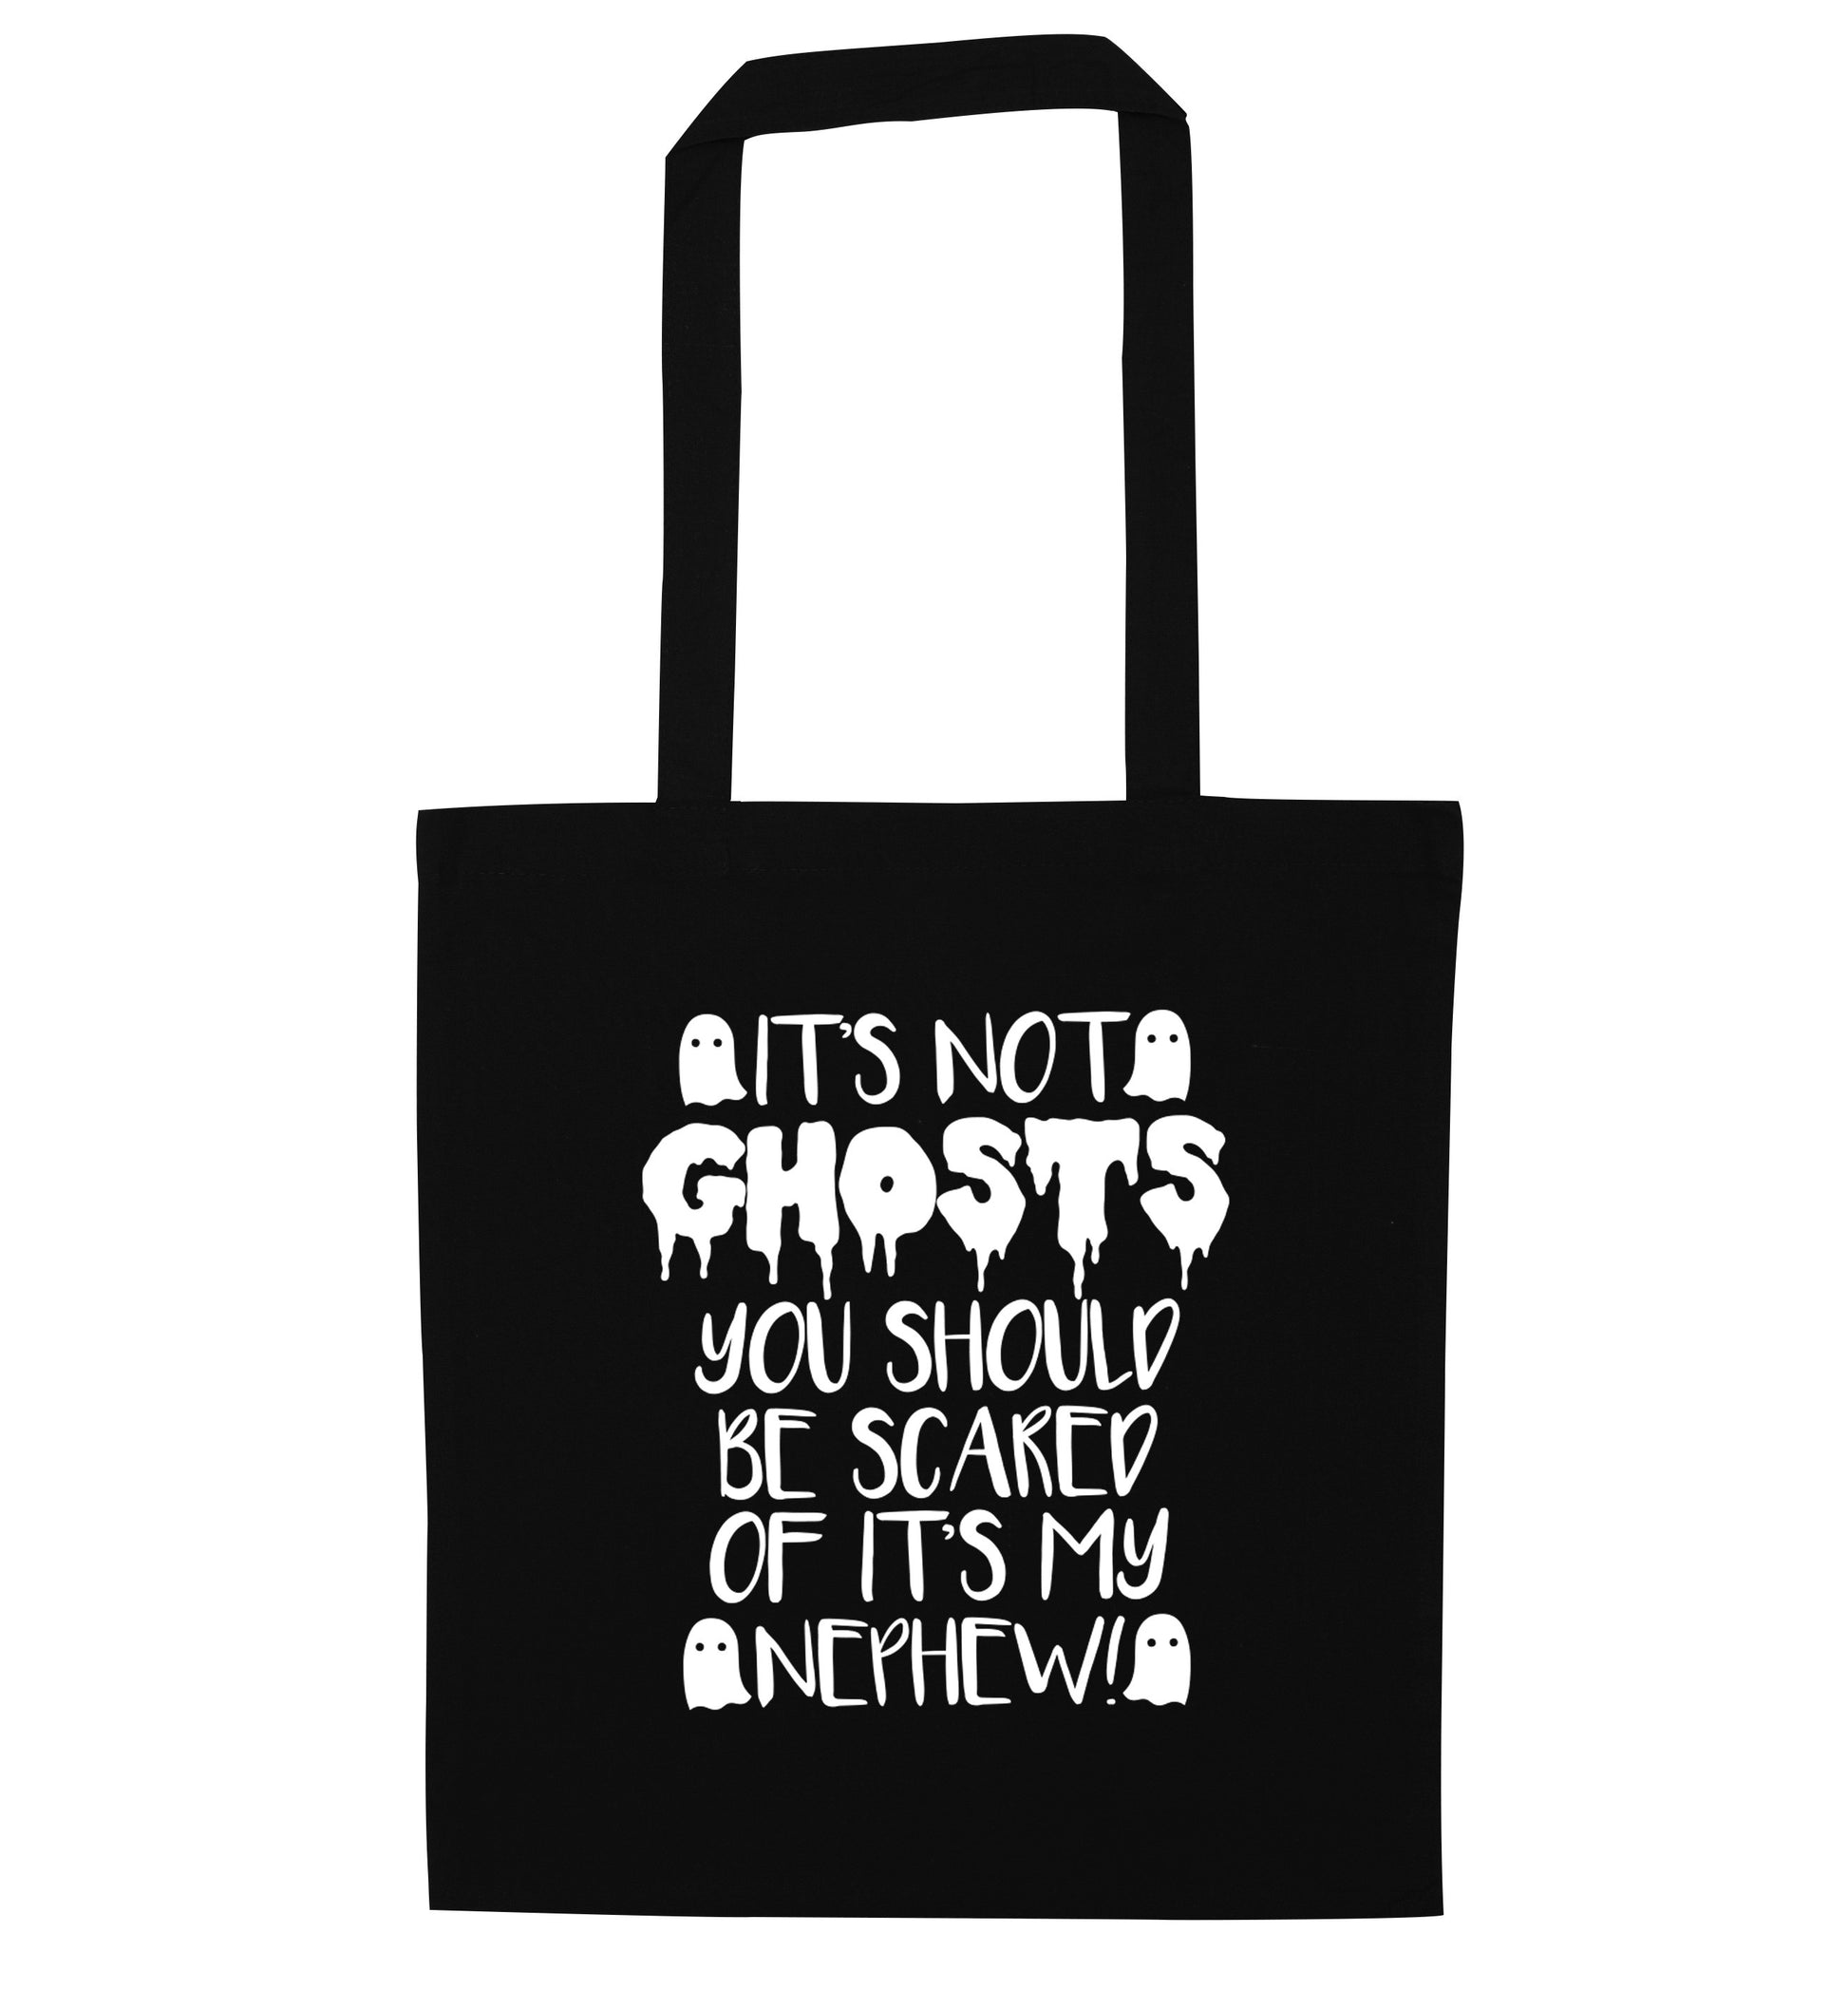 It's not ghosts you should be scared of it's my nephew! black tote bag